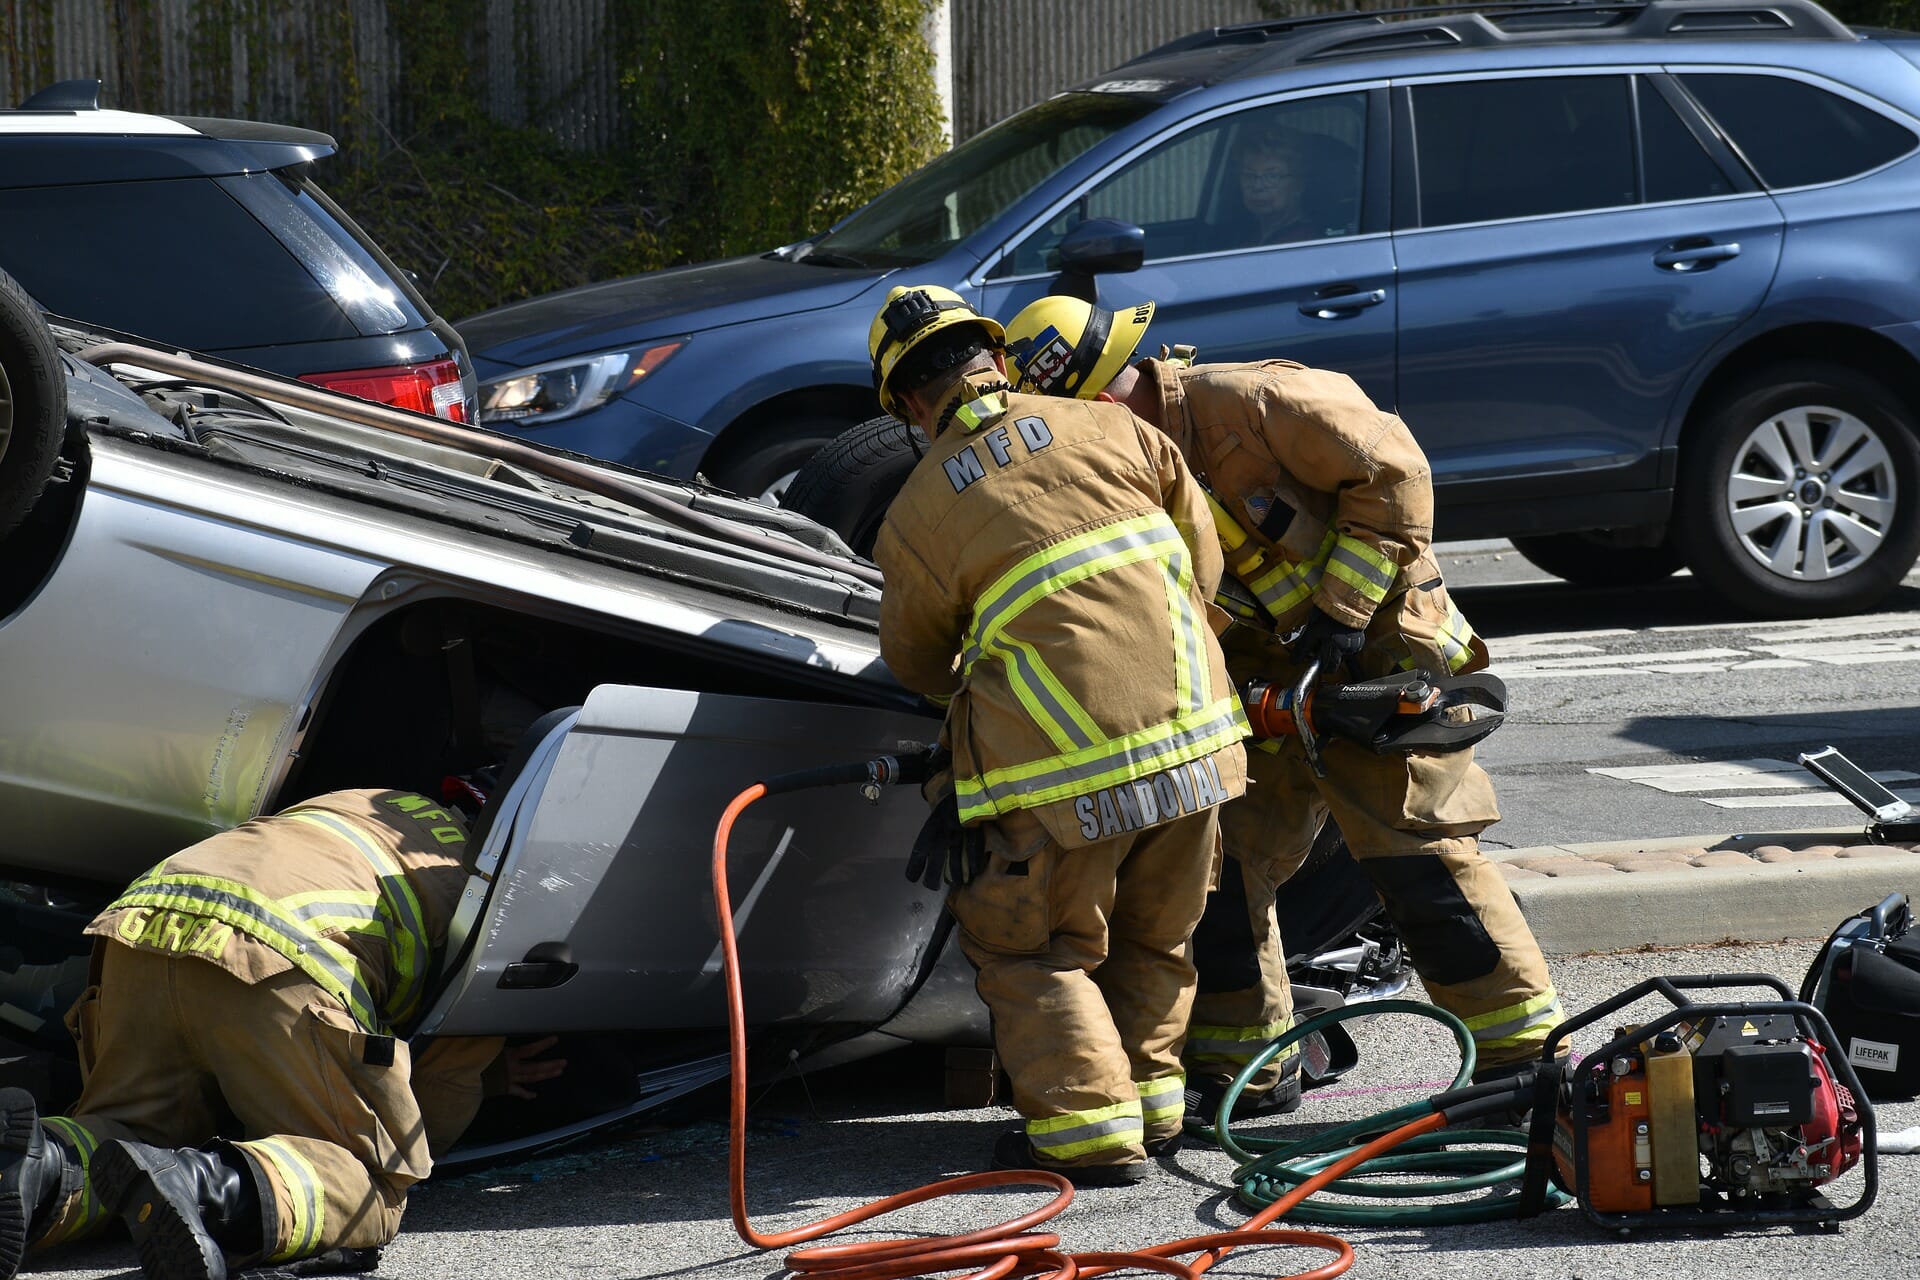 car accident kelly drive Philadelphia - firemen removing victim from car.